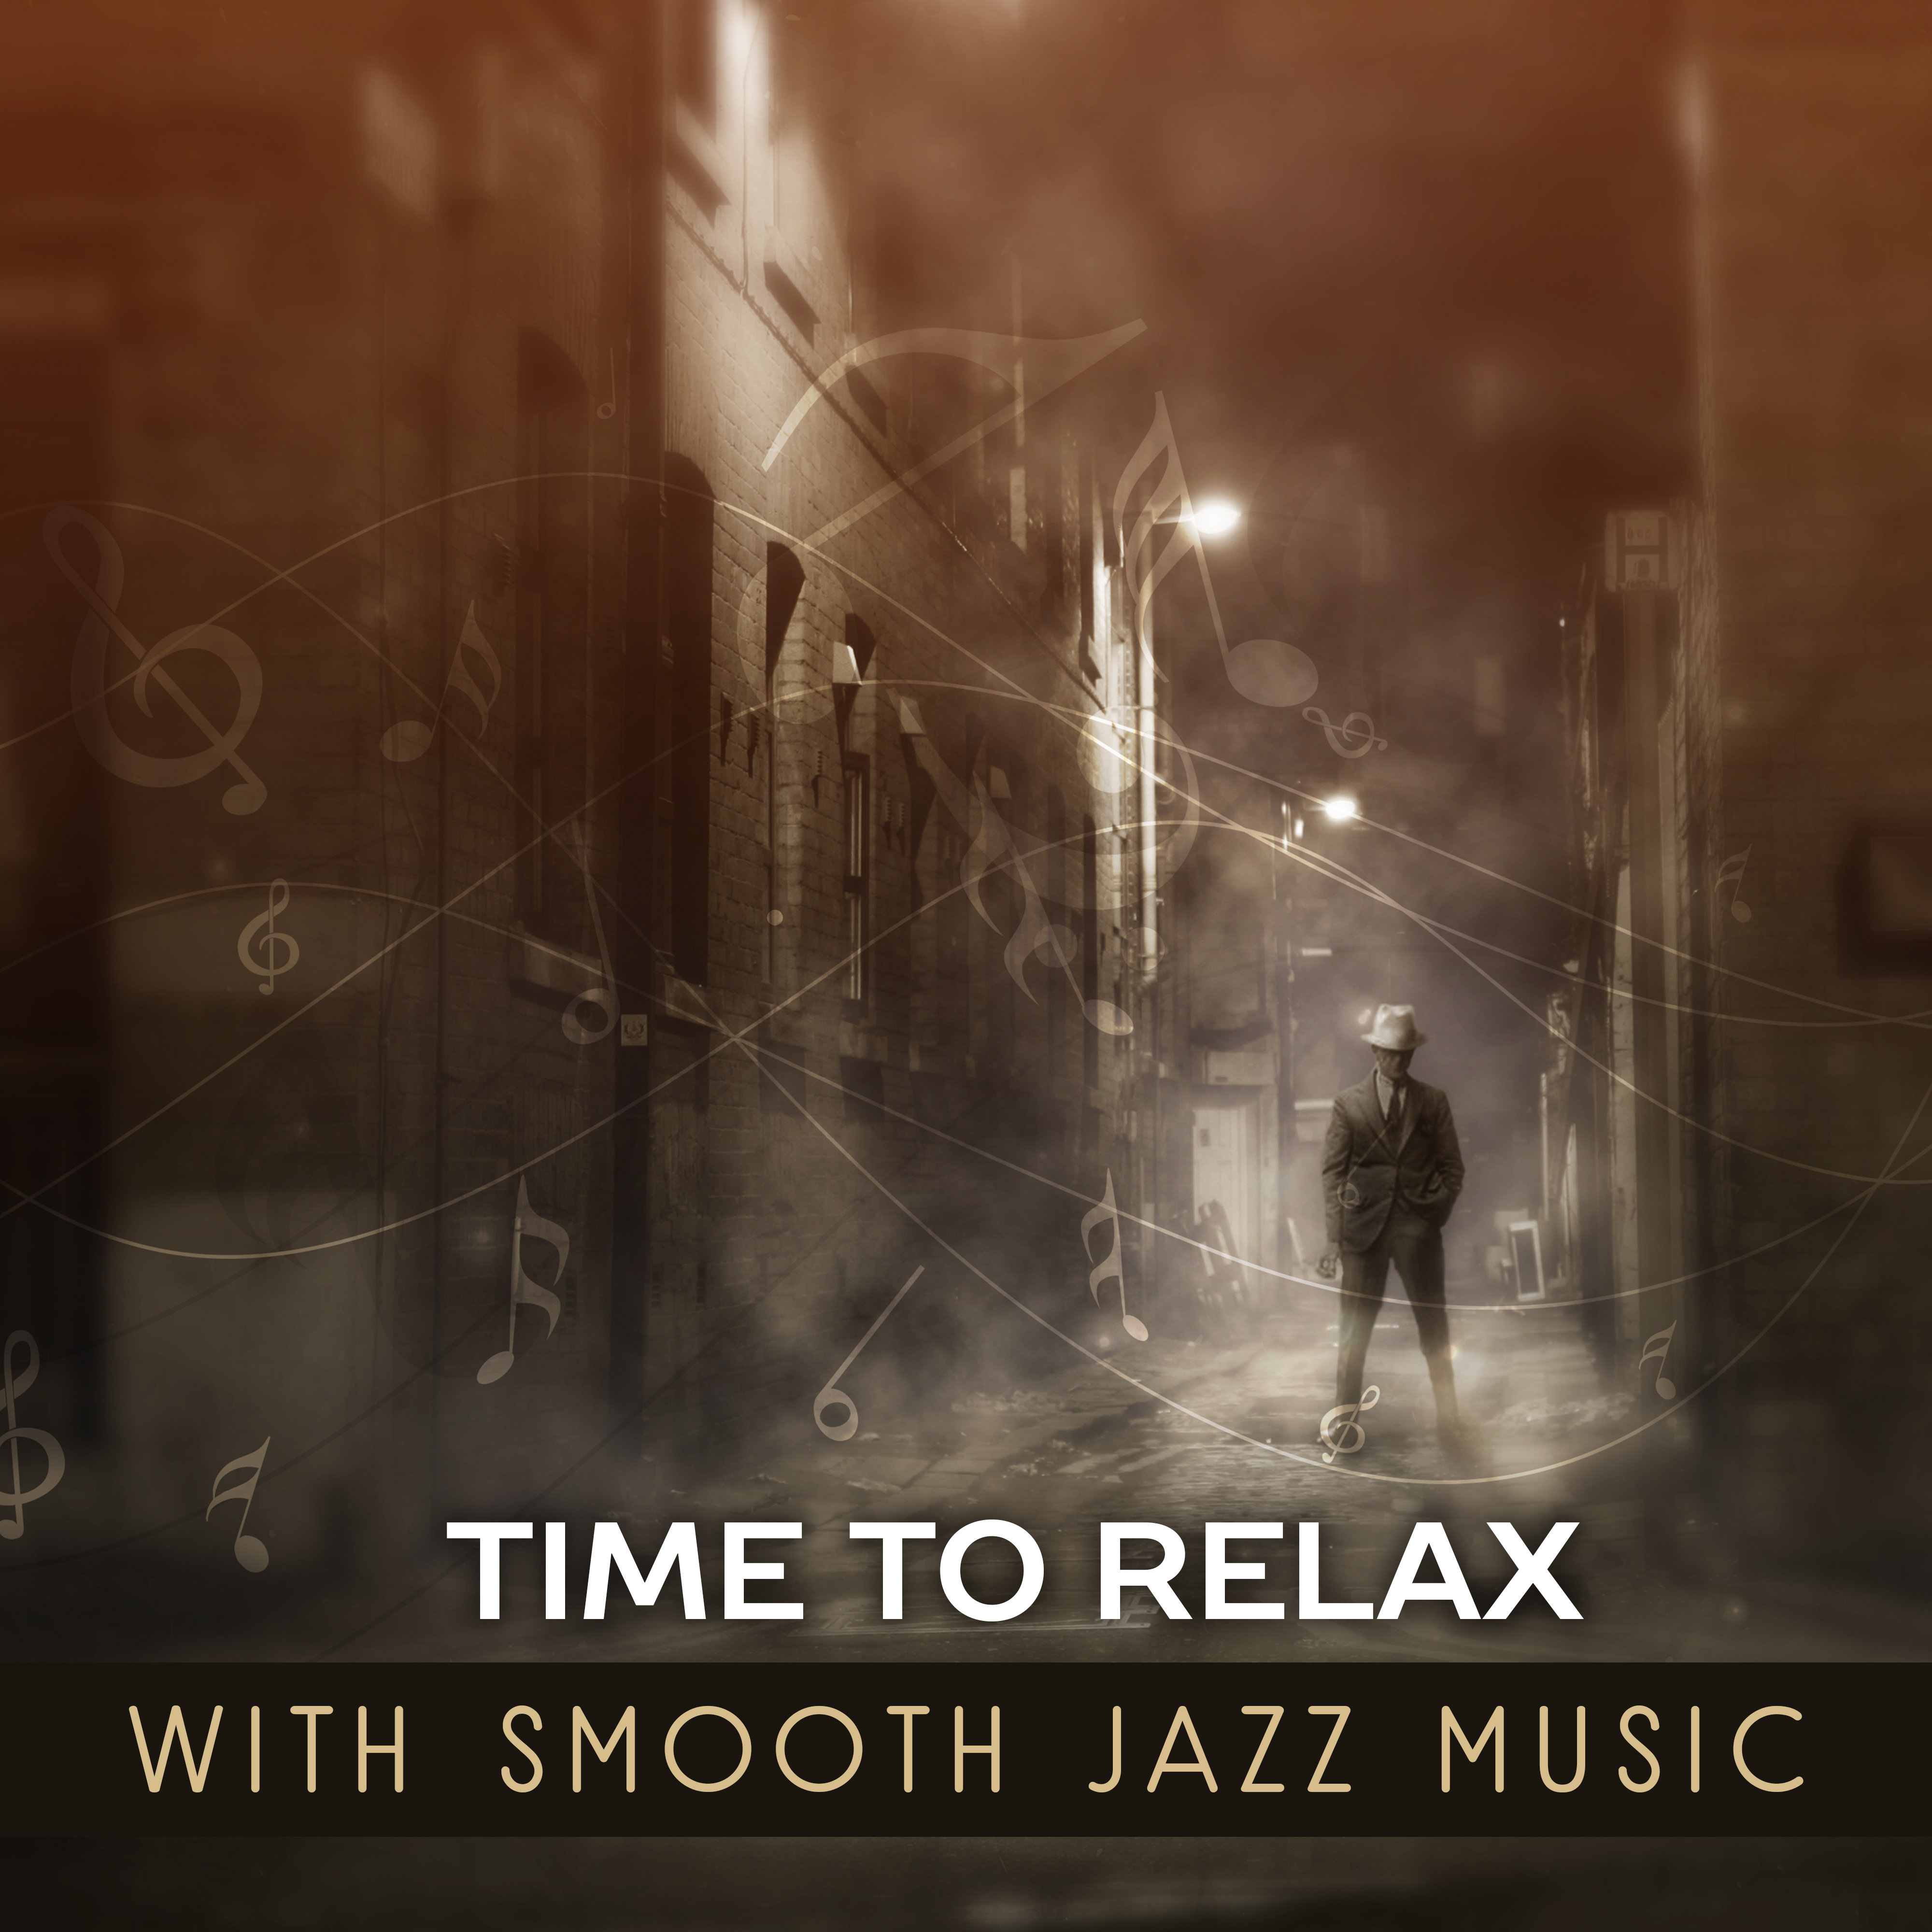 Time to Relax with Smooth Jazz Music  Easy Listening, Jazz Sounds to Calm Down, Evening Relaxation Music, Moonlight Jazz